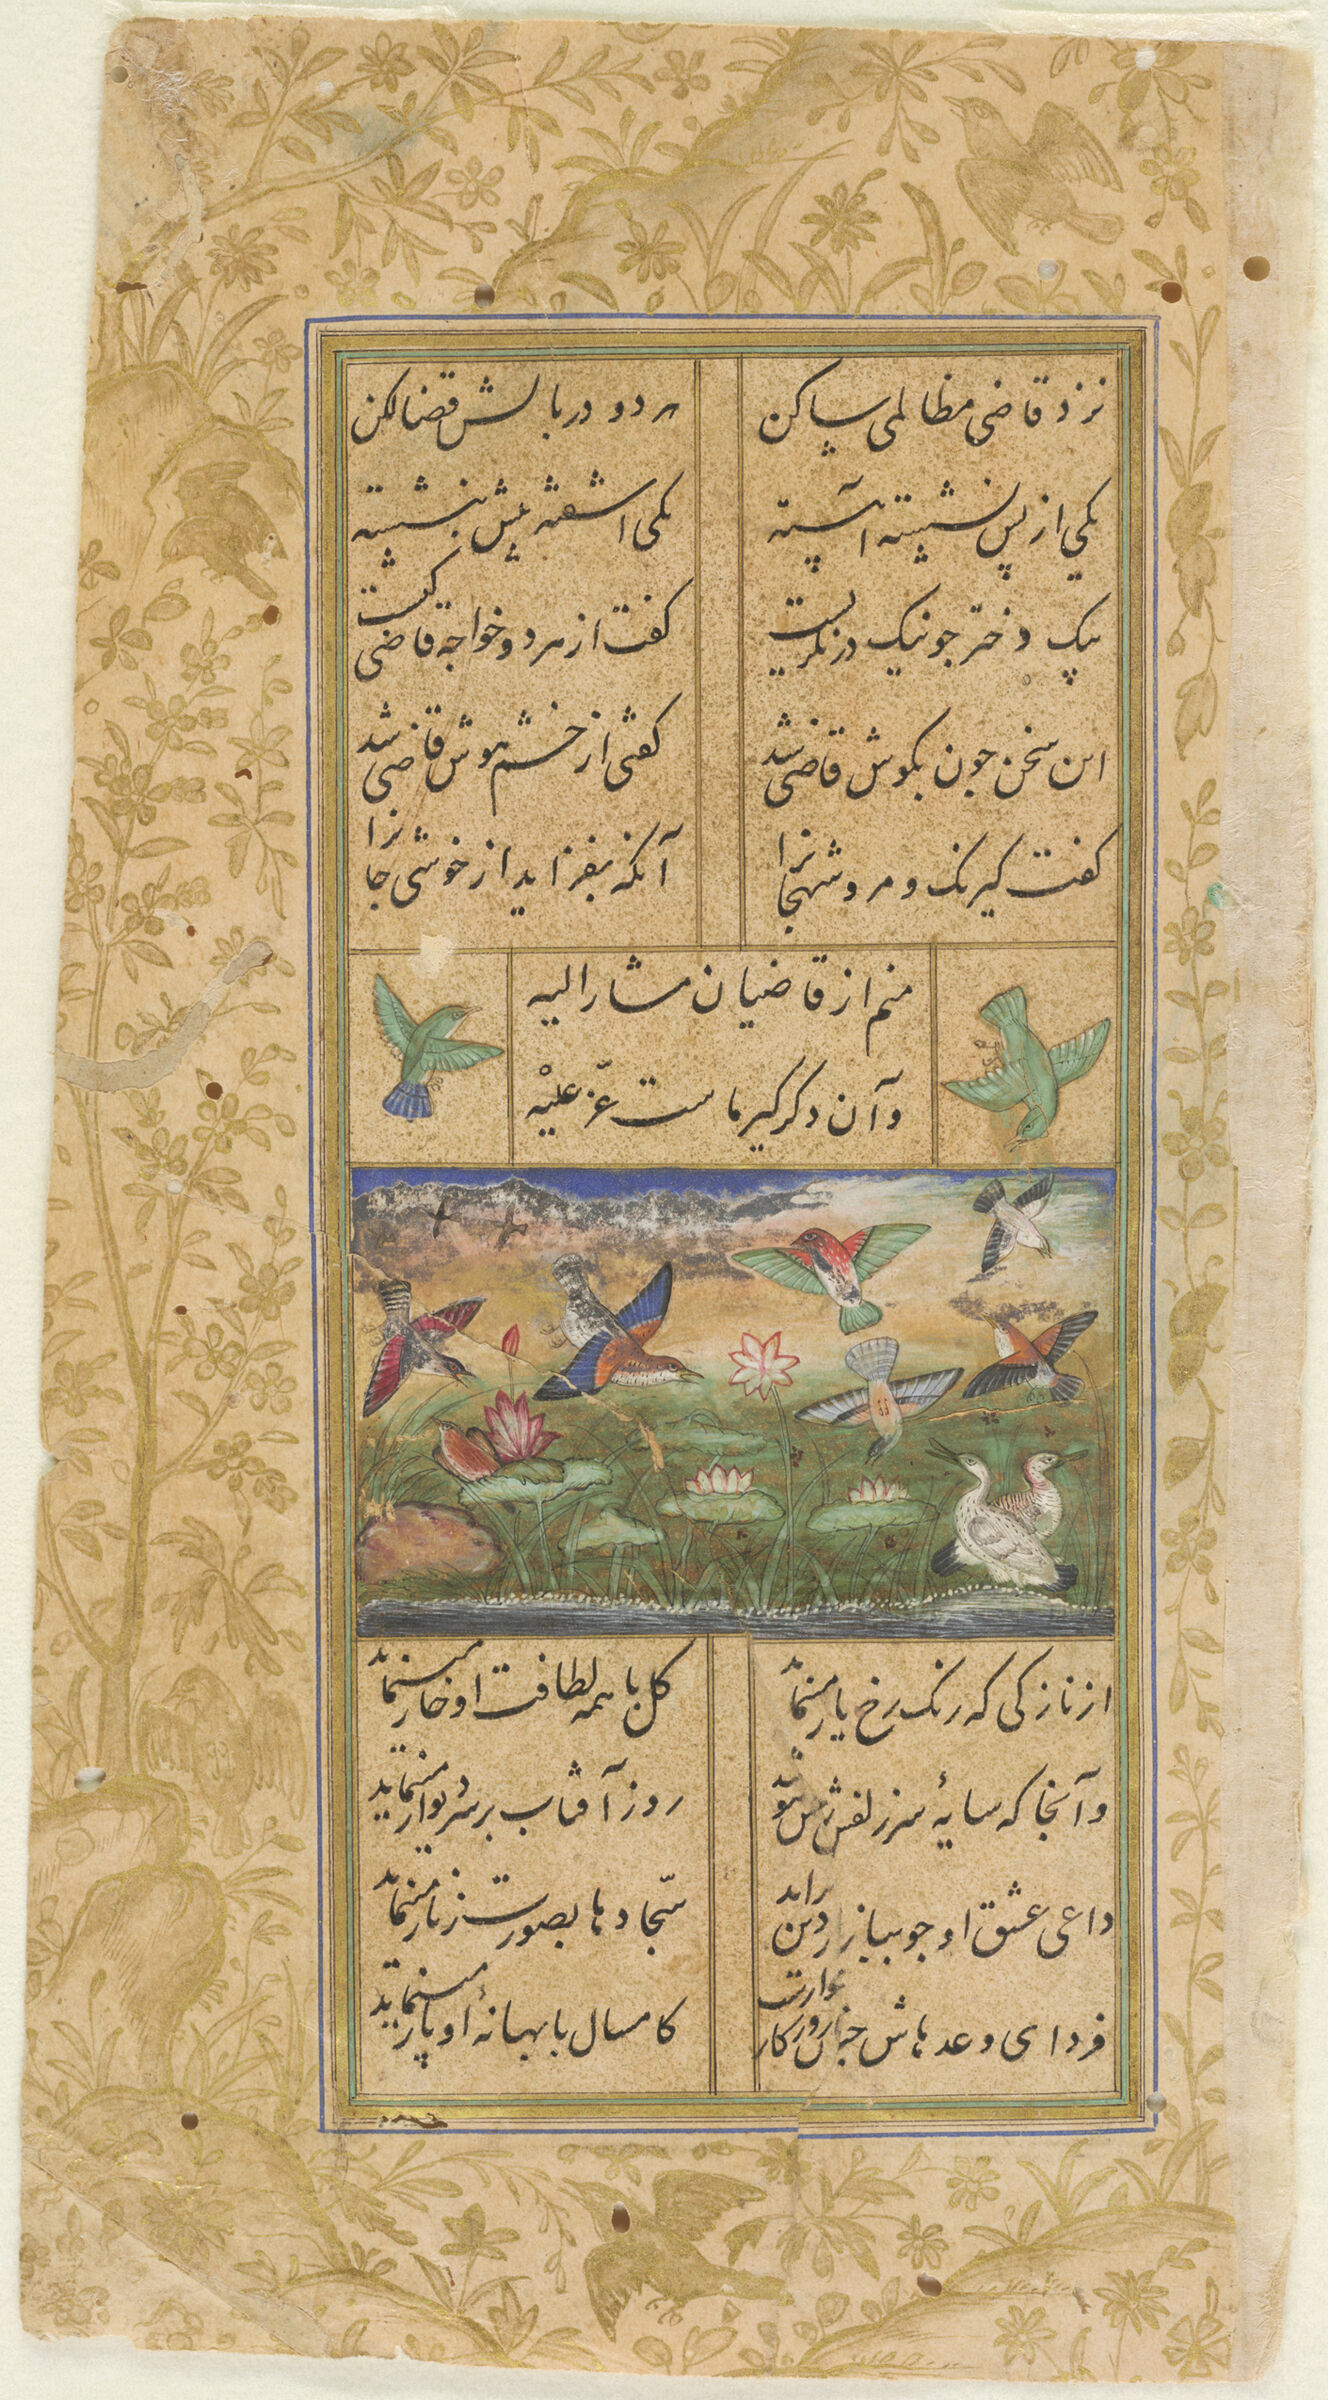 Birds And Lotus (Painting, Recto, Text, Verso), Folio 336 From A Manuscript Of The Divan (Collection Of Works) Of Anvari